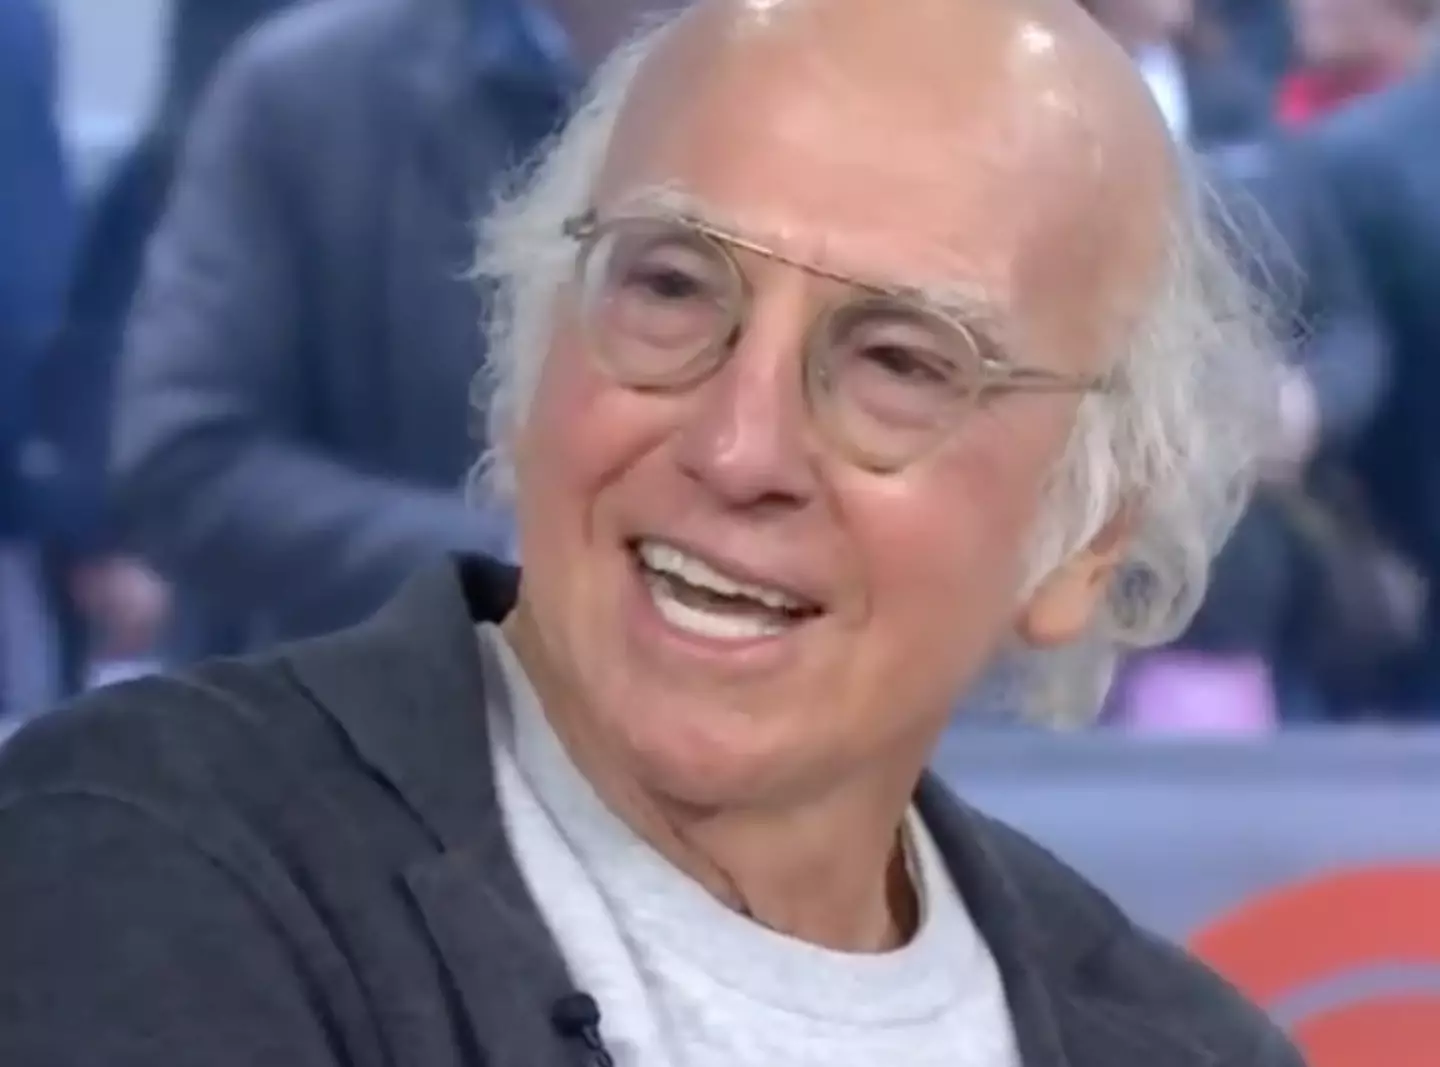 Larry David apologized after the attack.